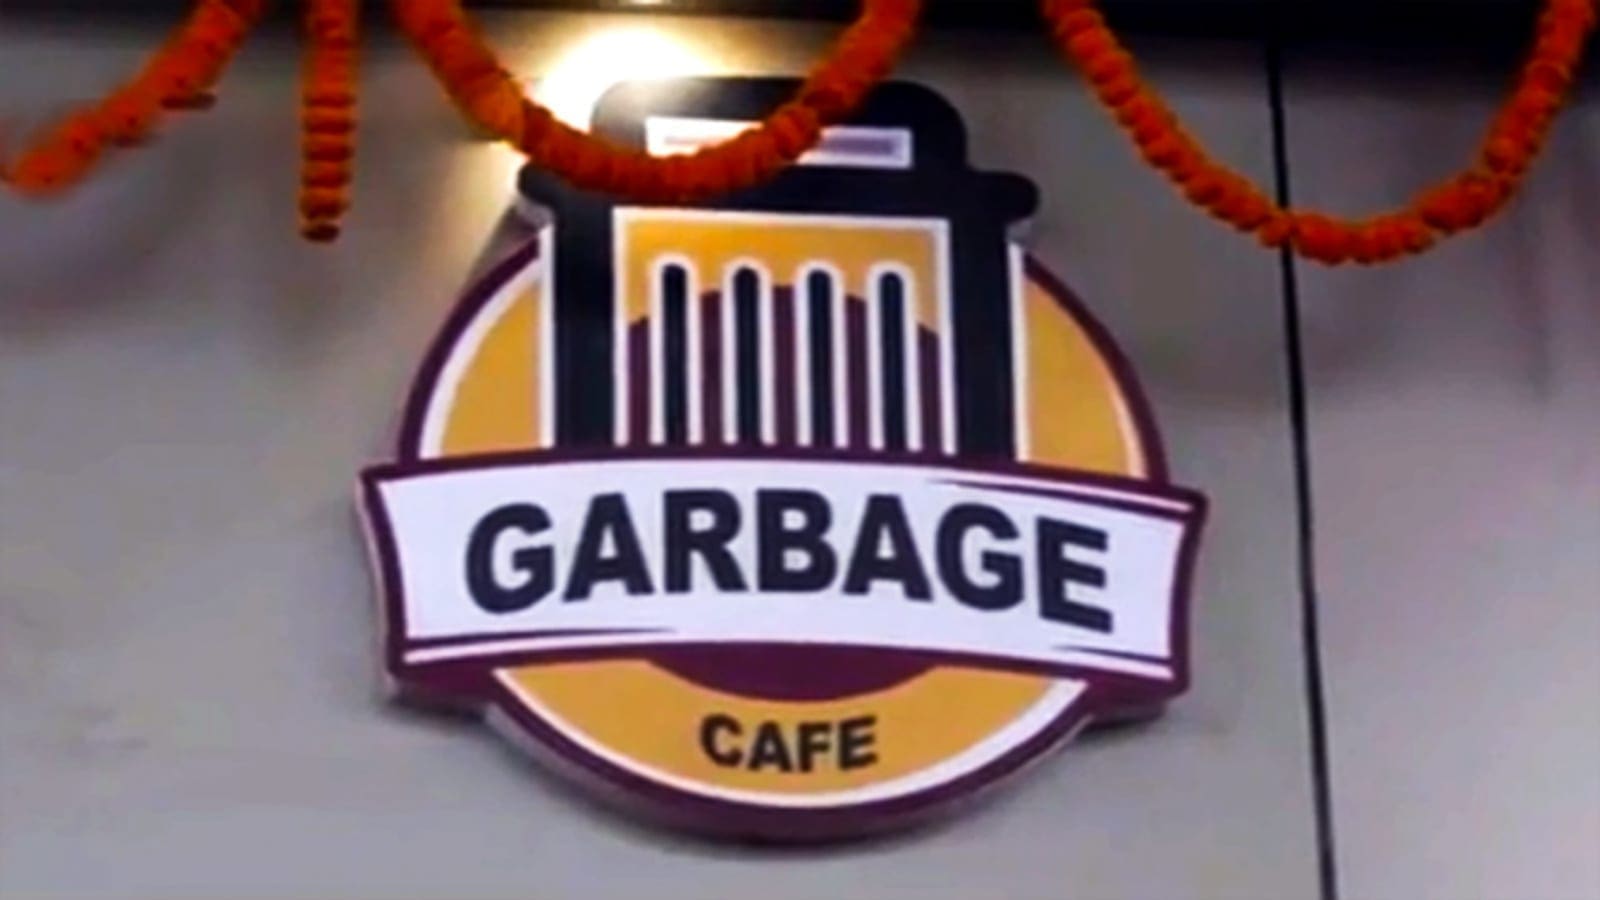 India’s garbage cafés accept plastic waste for meals in new drive to rid cities of plastic waste